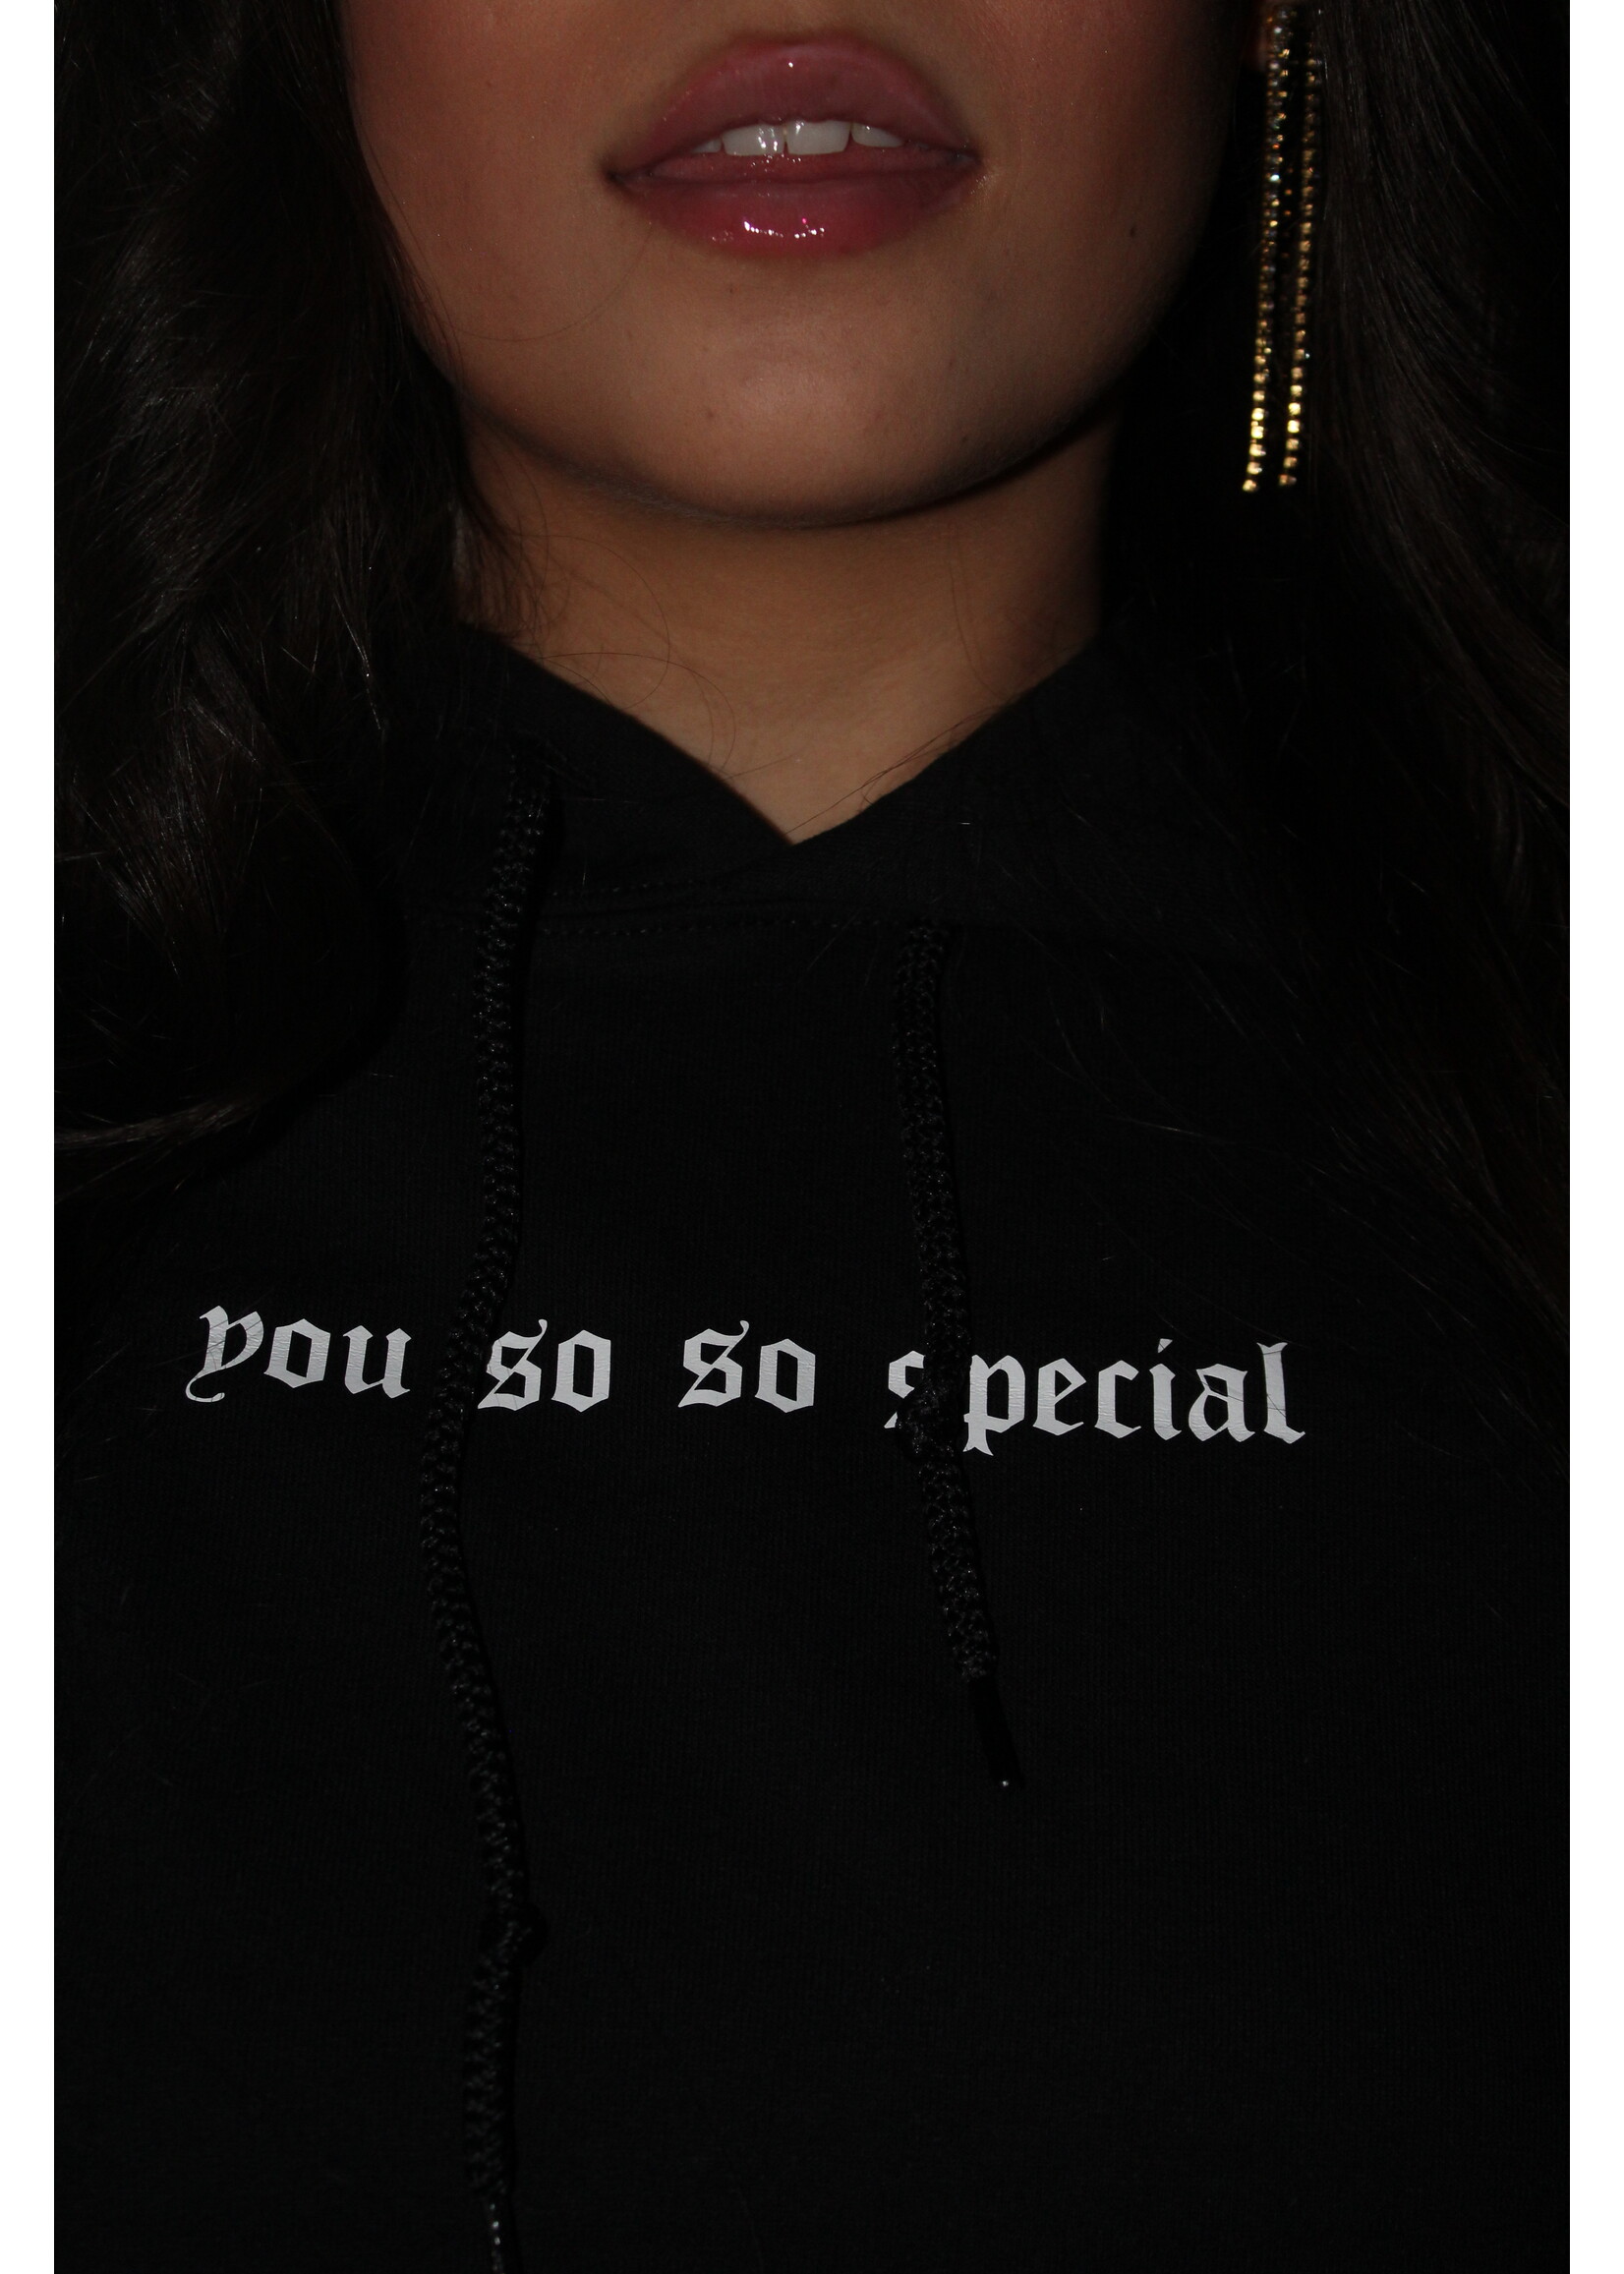 YOU ARE SPECIAL "You So So Special" Black Hoodie UNISEX